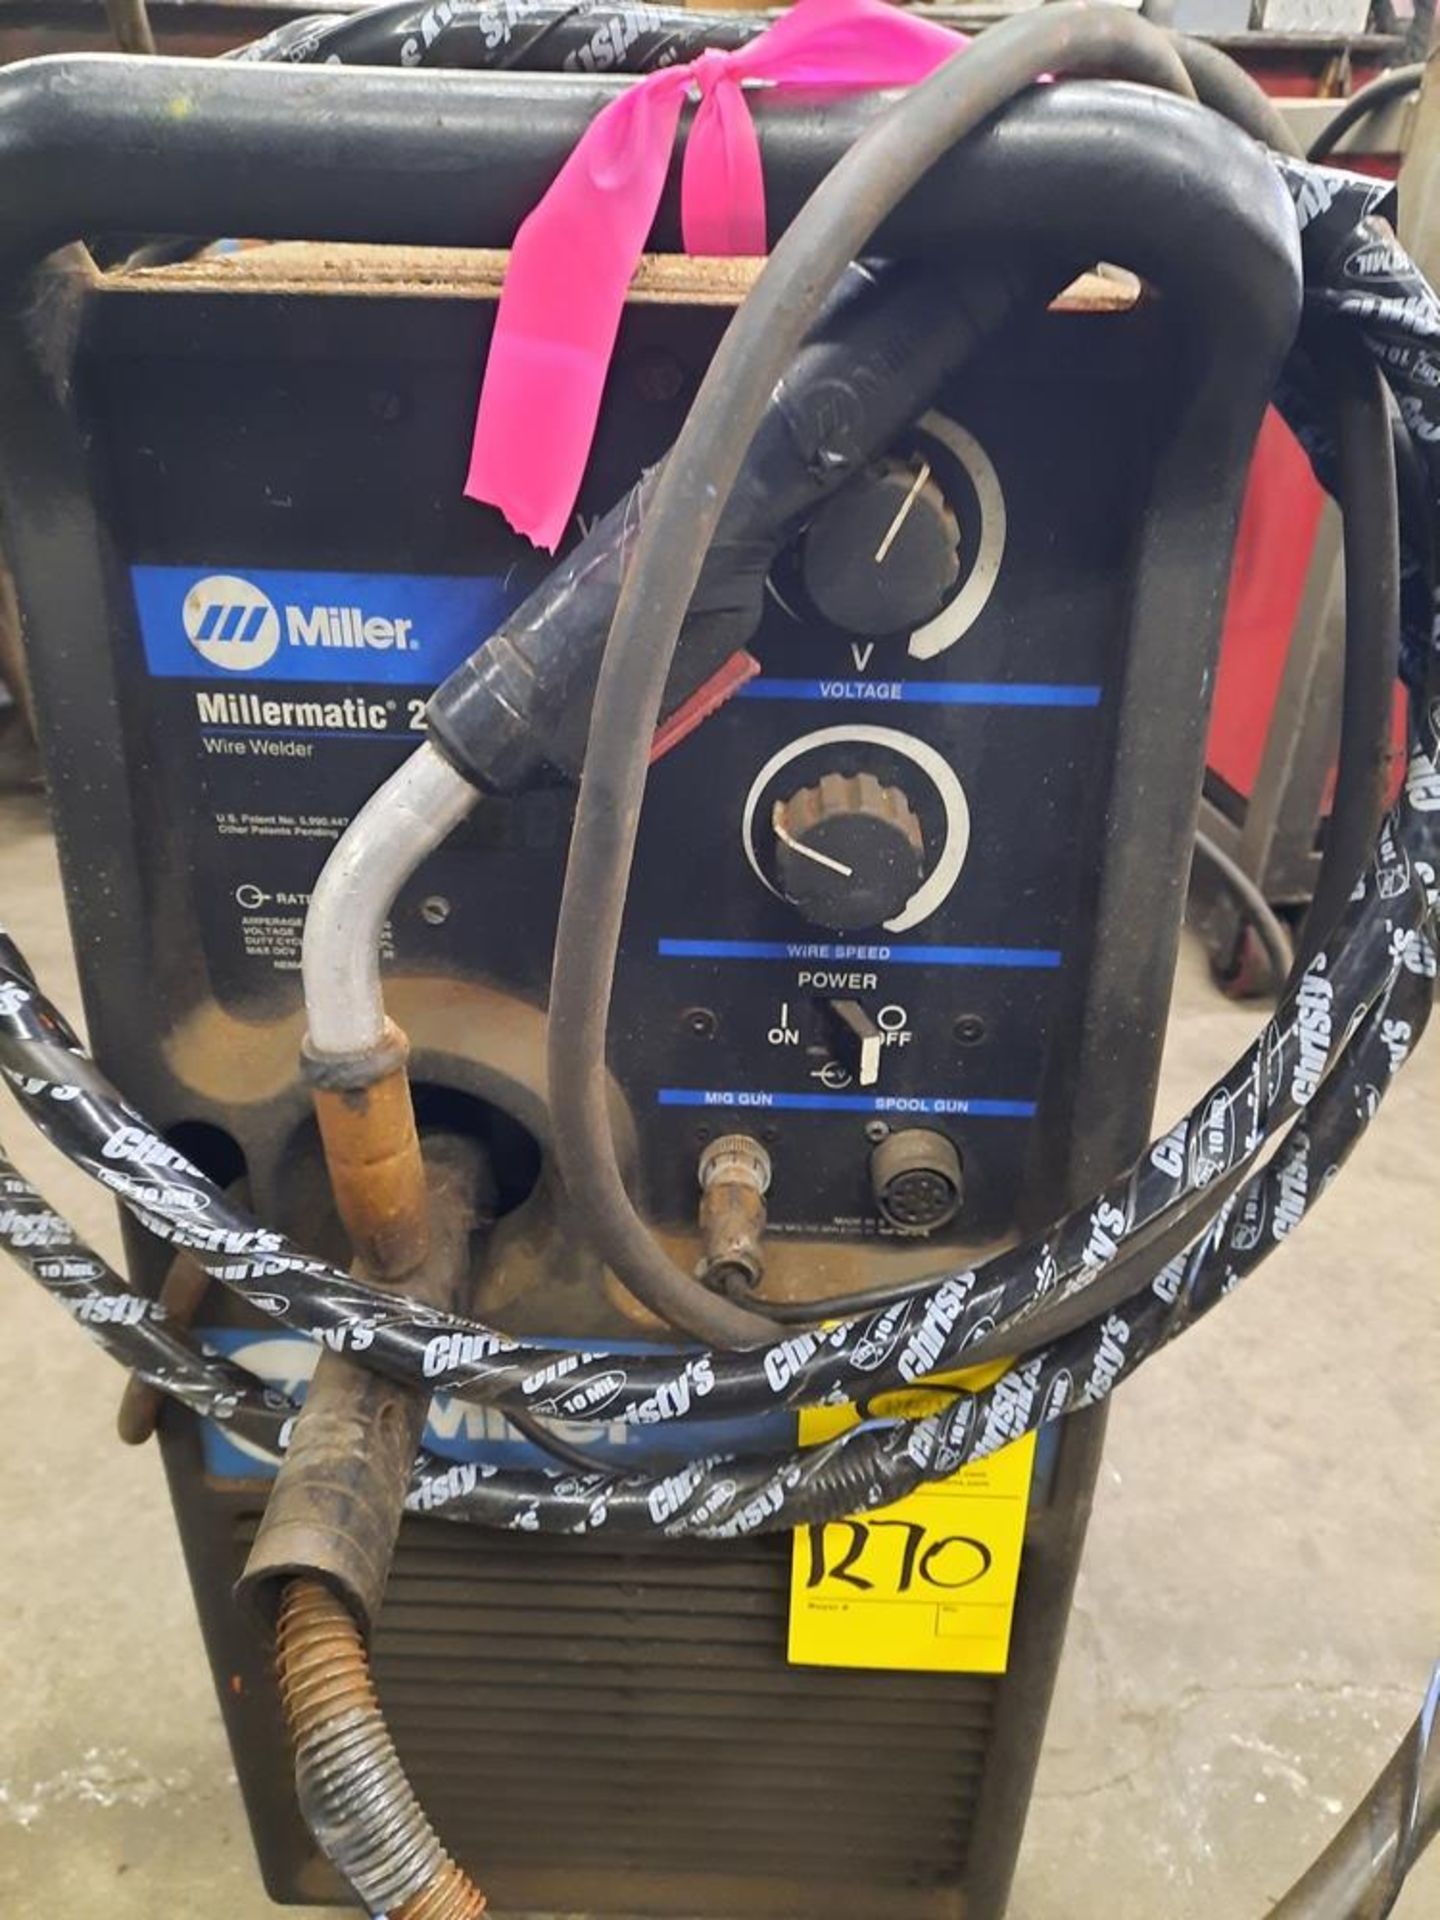 Miller Mdl. Millermatic 225 Wire Welder, 230 volts: Required Loading Fee $150.00, Rigger-Norm - Image 3 of 3